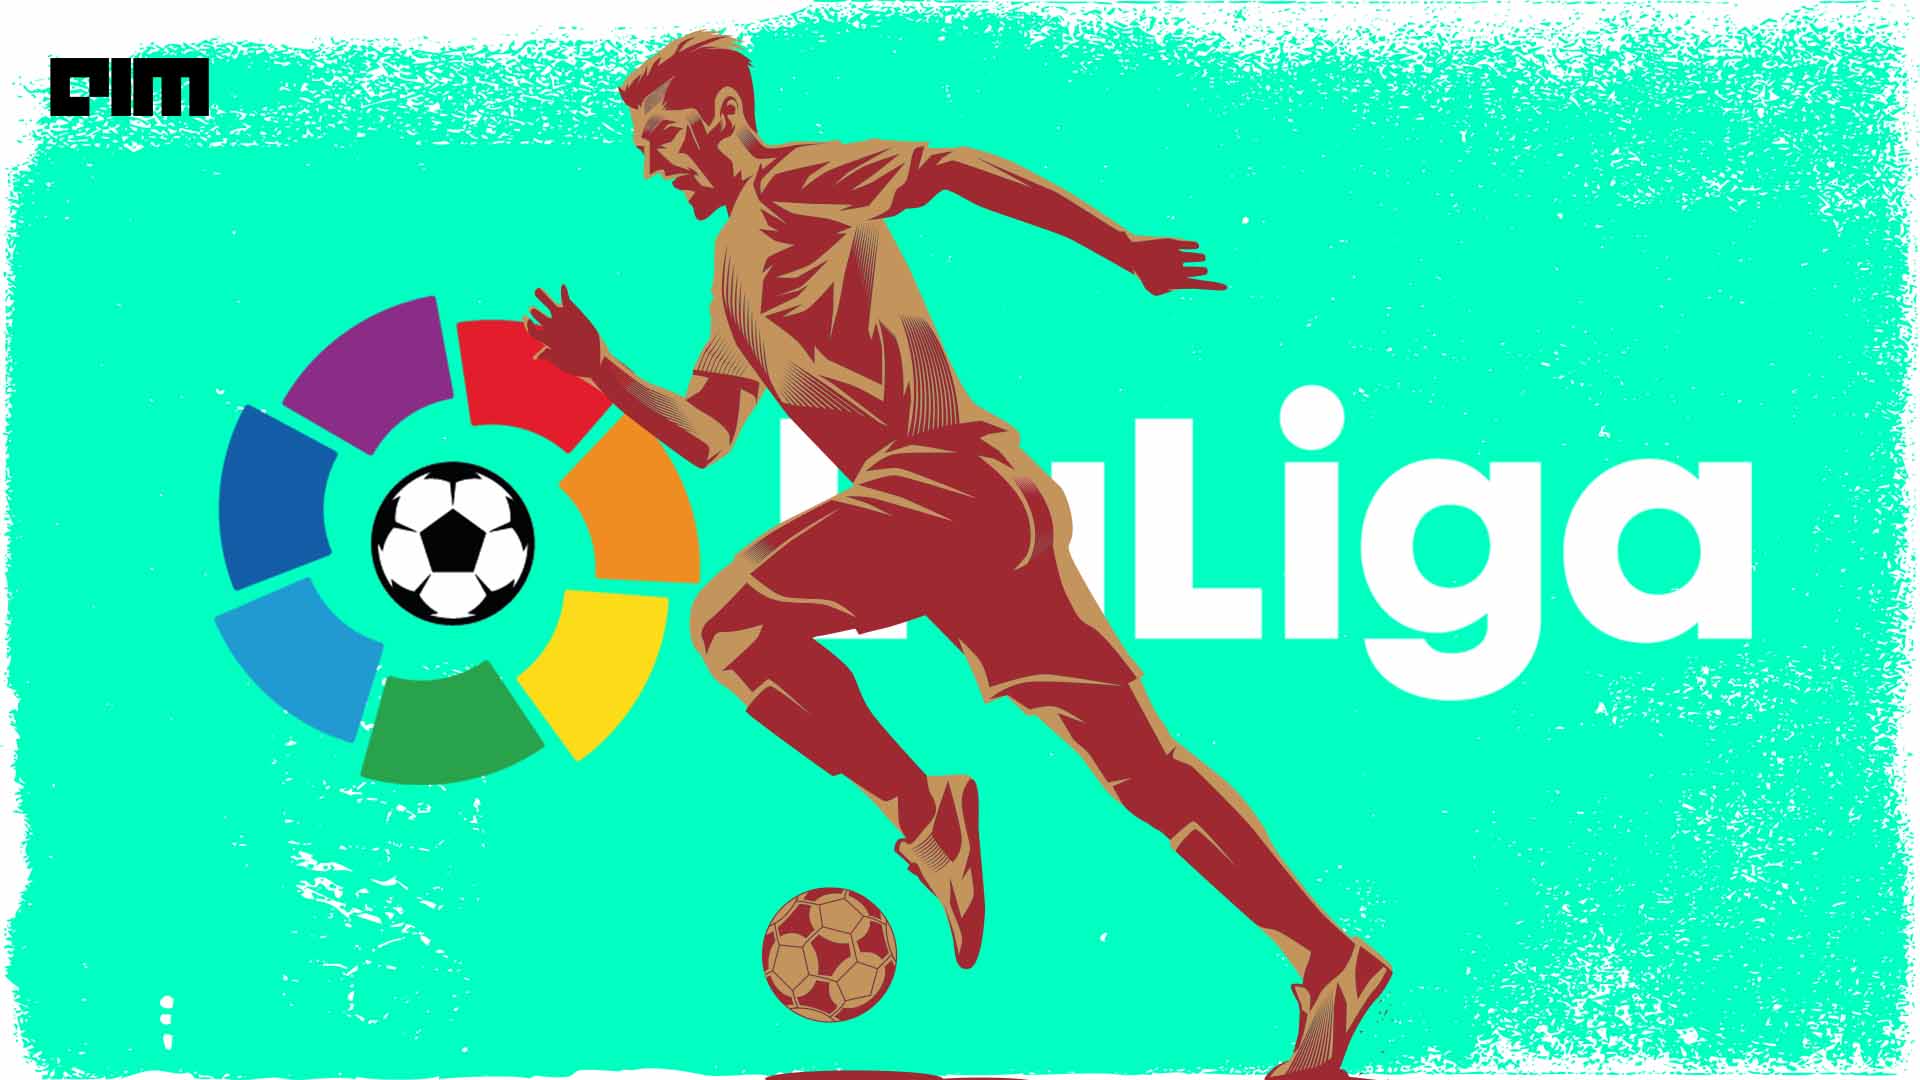 Design a logo that reflects the passion for football/soccer and the energy  of the channel.